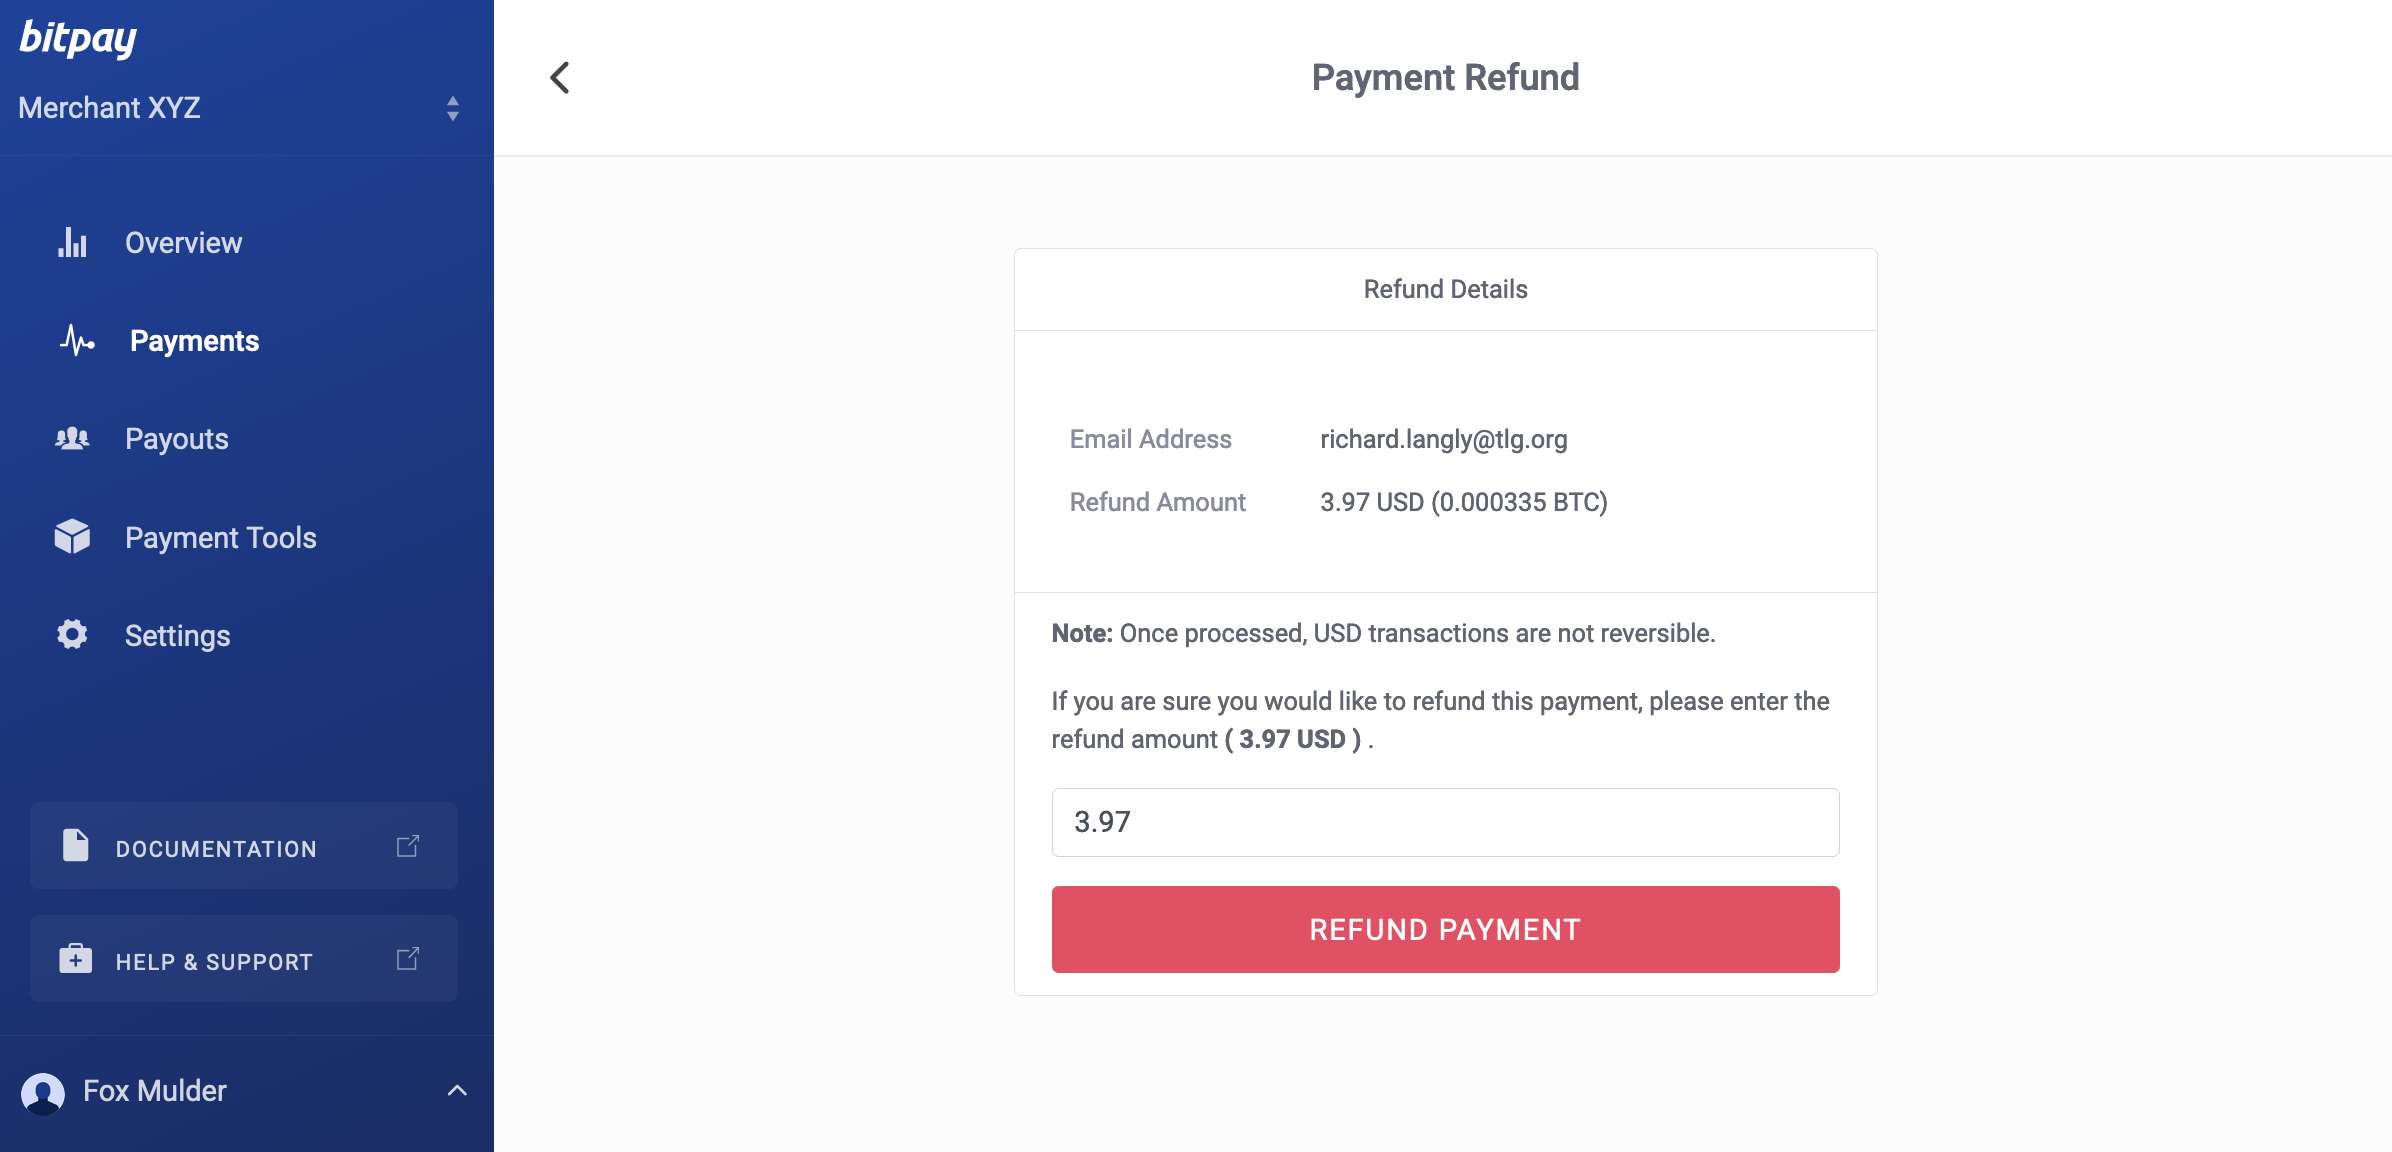 dashboard_payment_refund_confirm.png